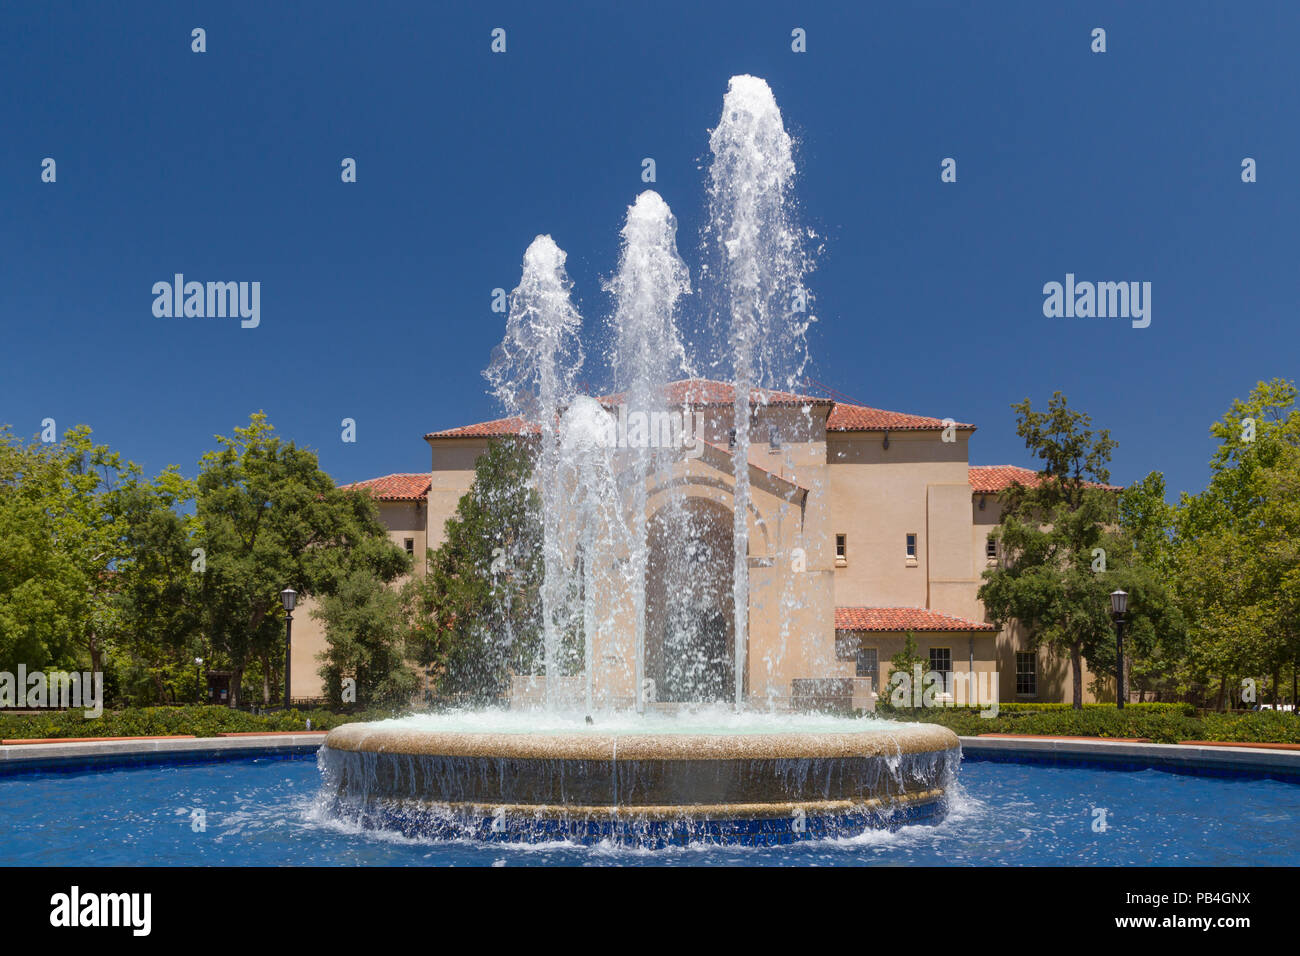 STANFORD, UNITED STATES - July 6: Stanford Hoover Tower Fountain on the campus of historic Stanford University. July 6, 2013. Stock Photo